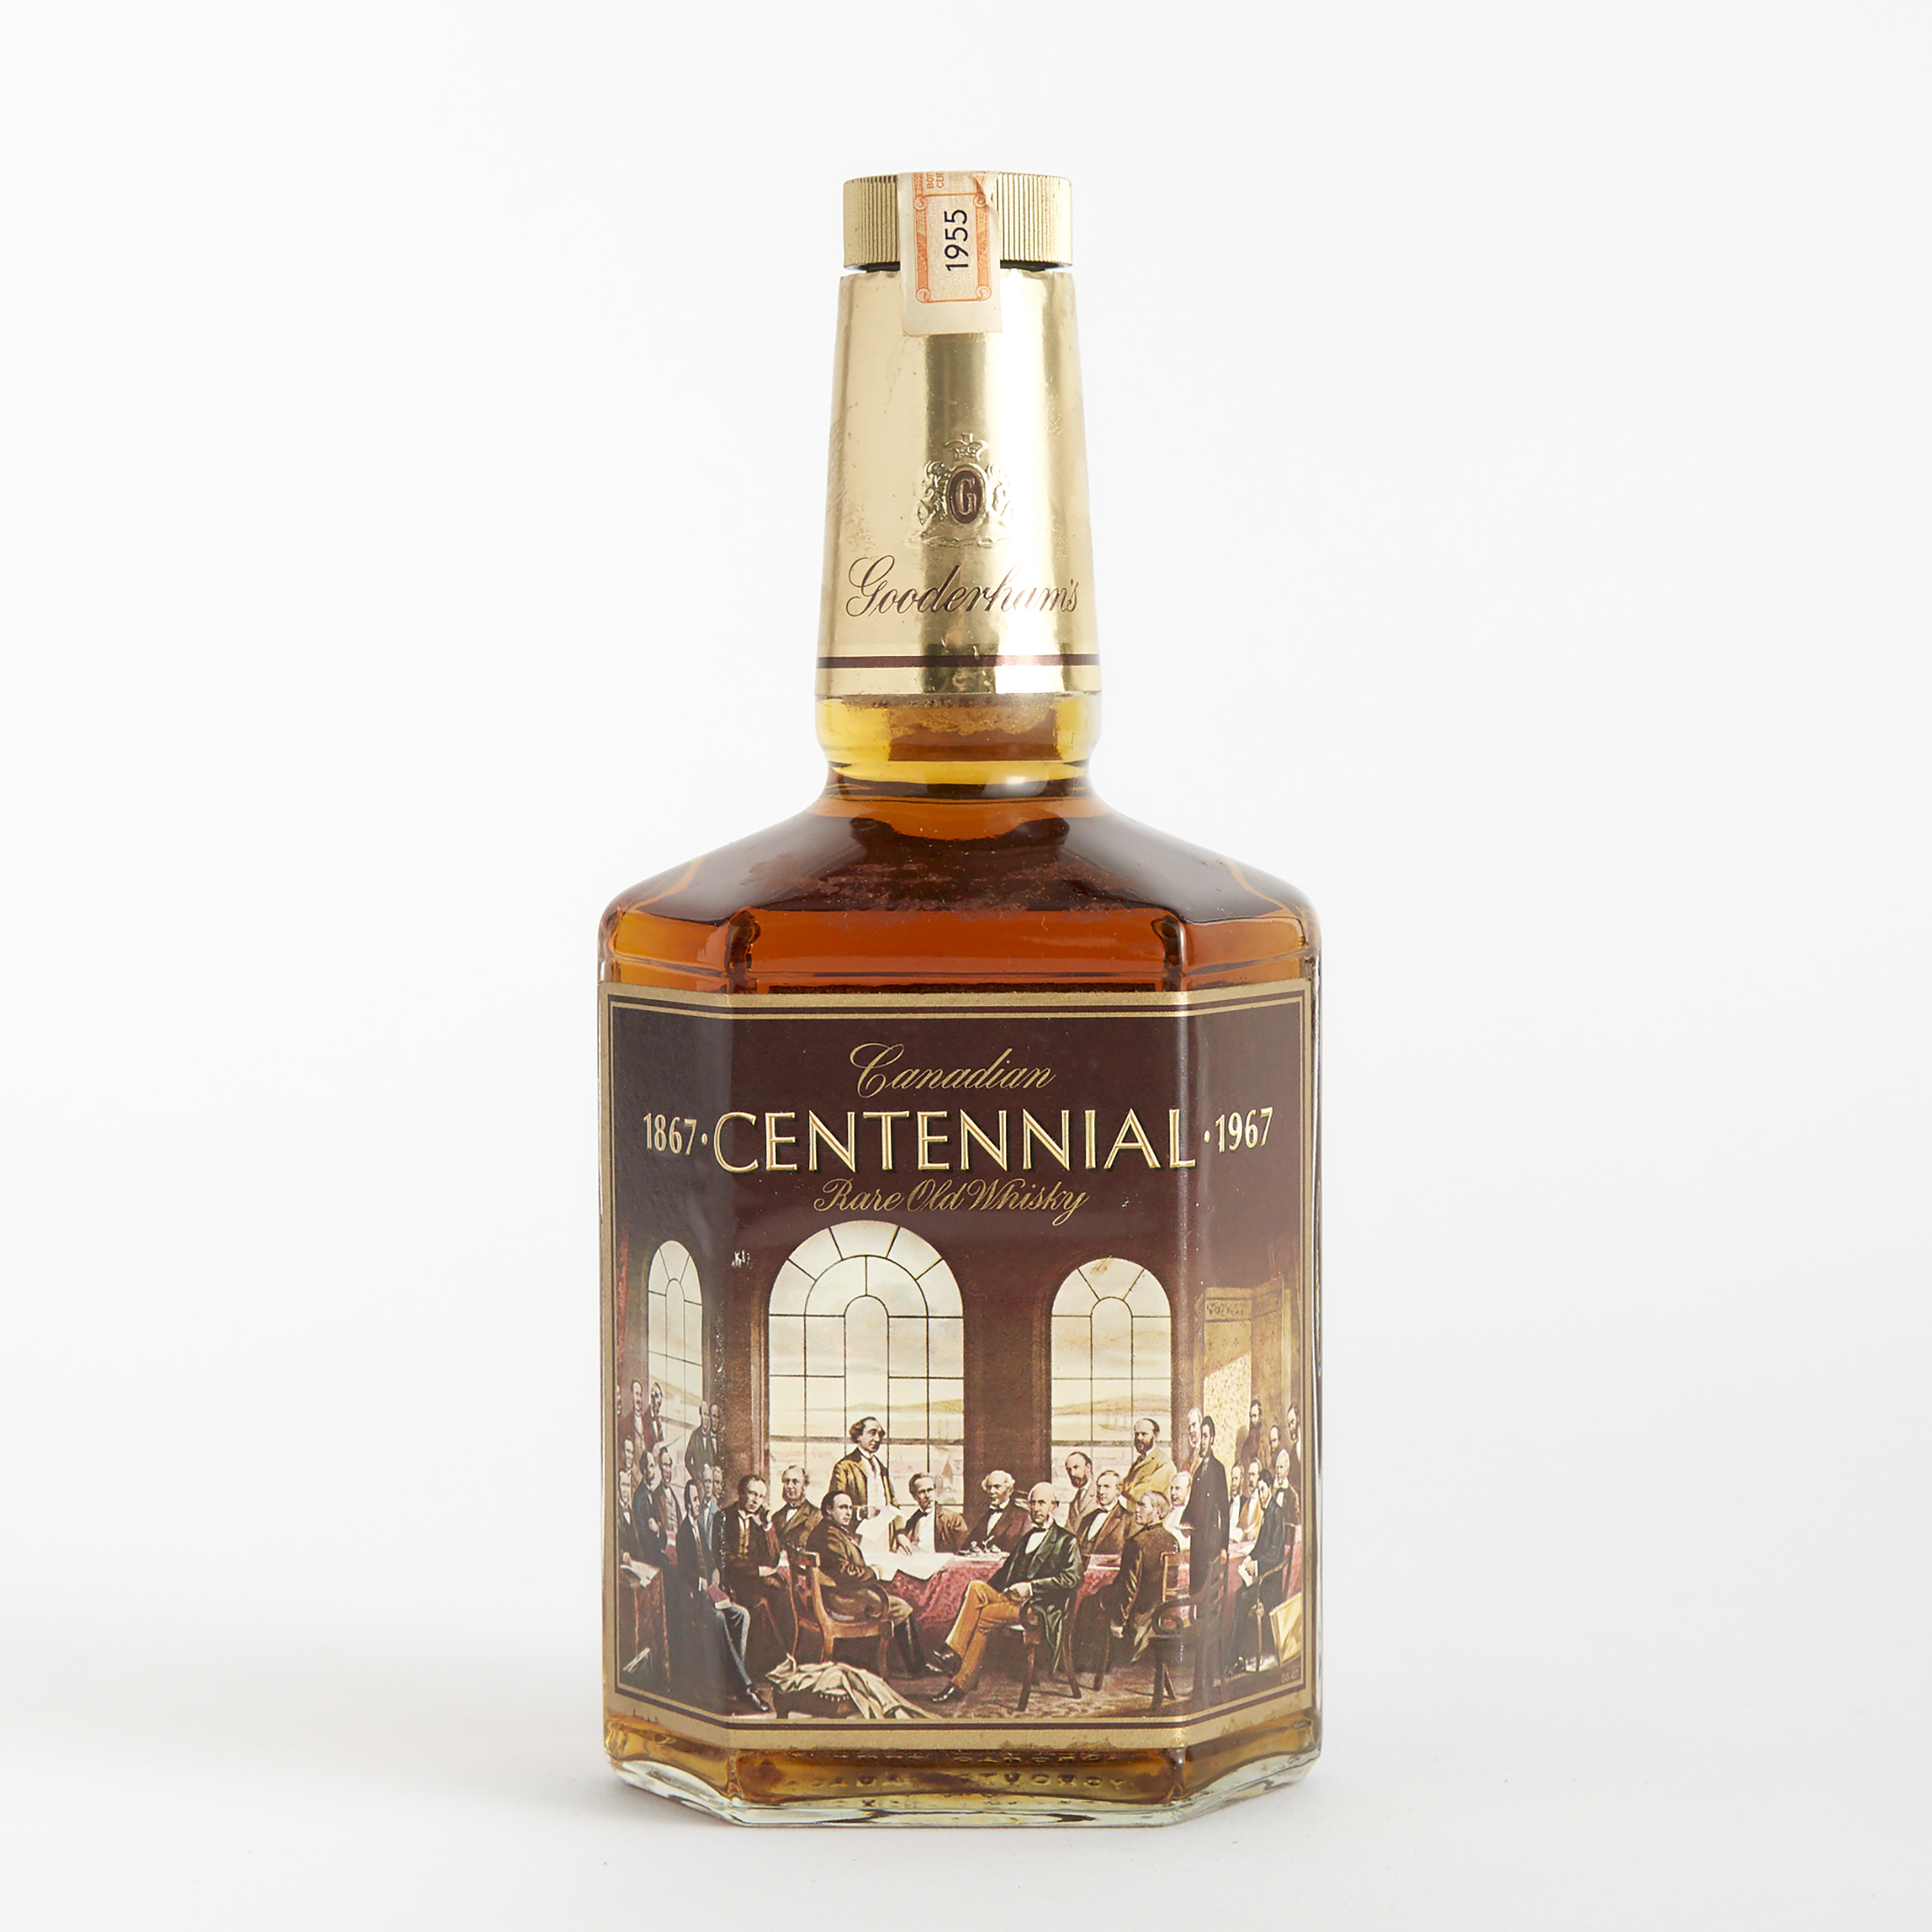 CANADIAN CENTENNIAL PURE OLD WHISKY 15 YEARS (ONE 25 OUNCES)